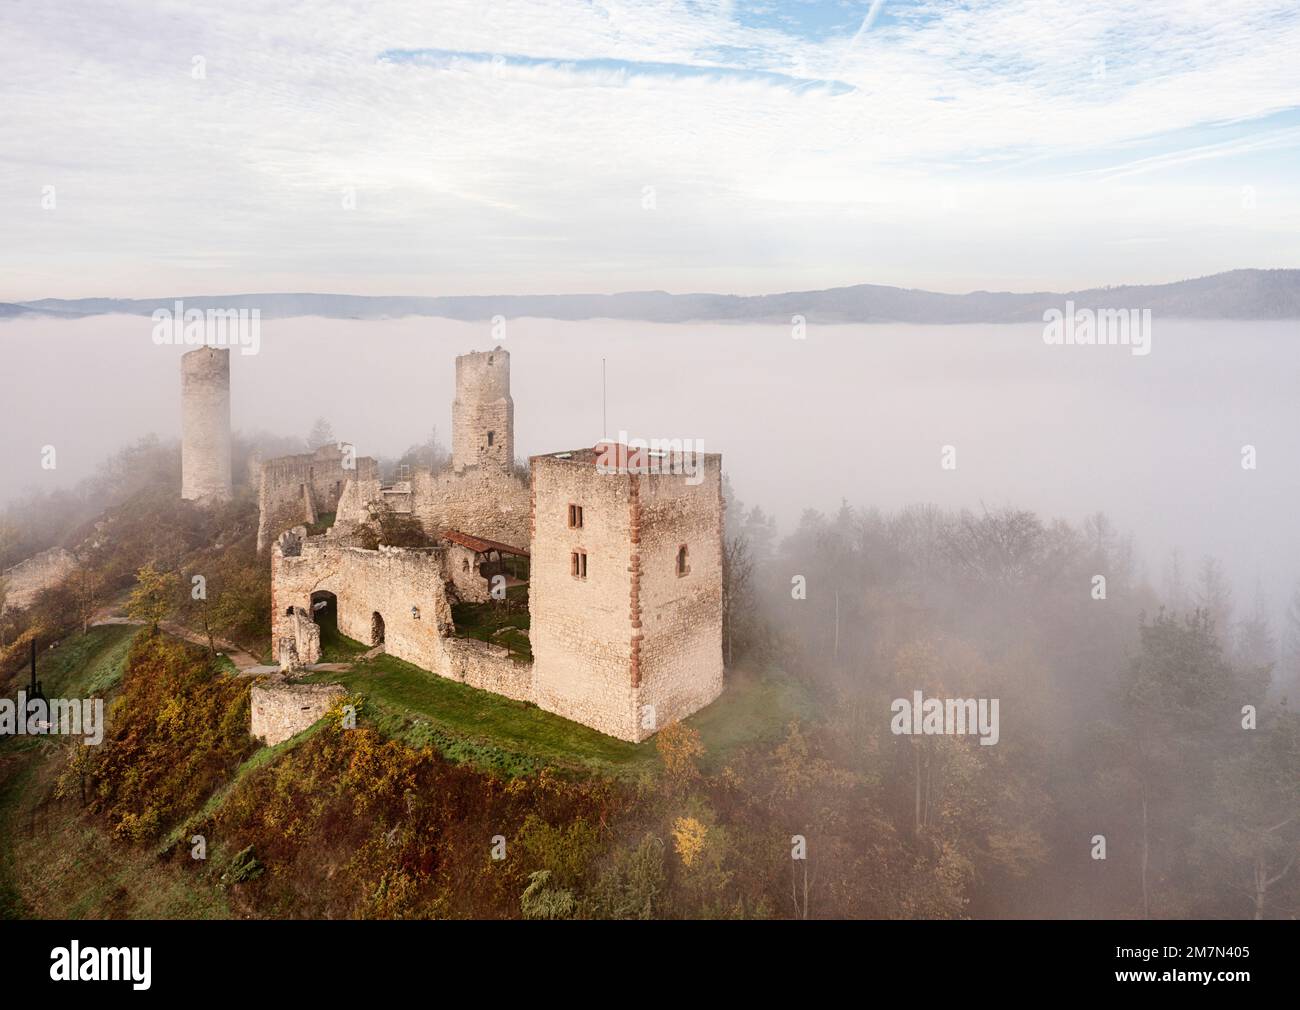 Germany, Thuringia, Gerstungen, Lauchröden, Brandenburg castle ruin and mountains rise from the valley mist, overview Stock Photo